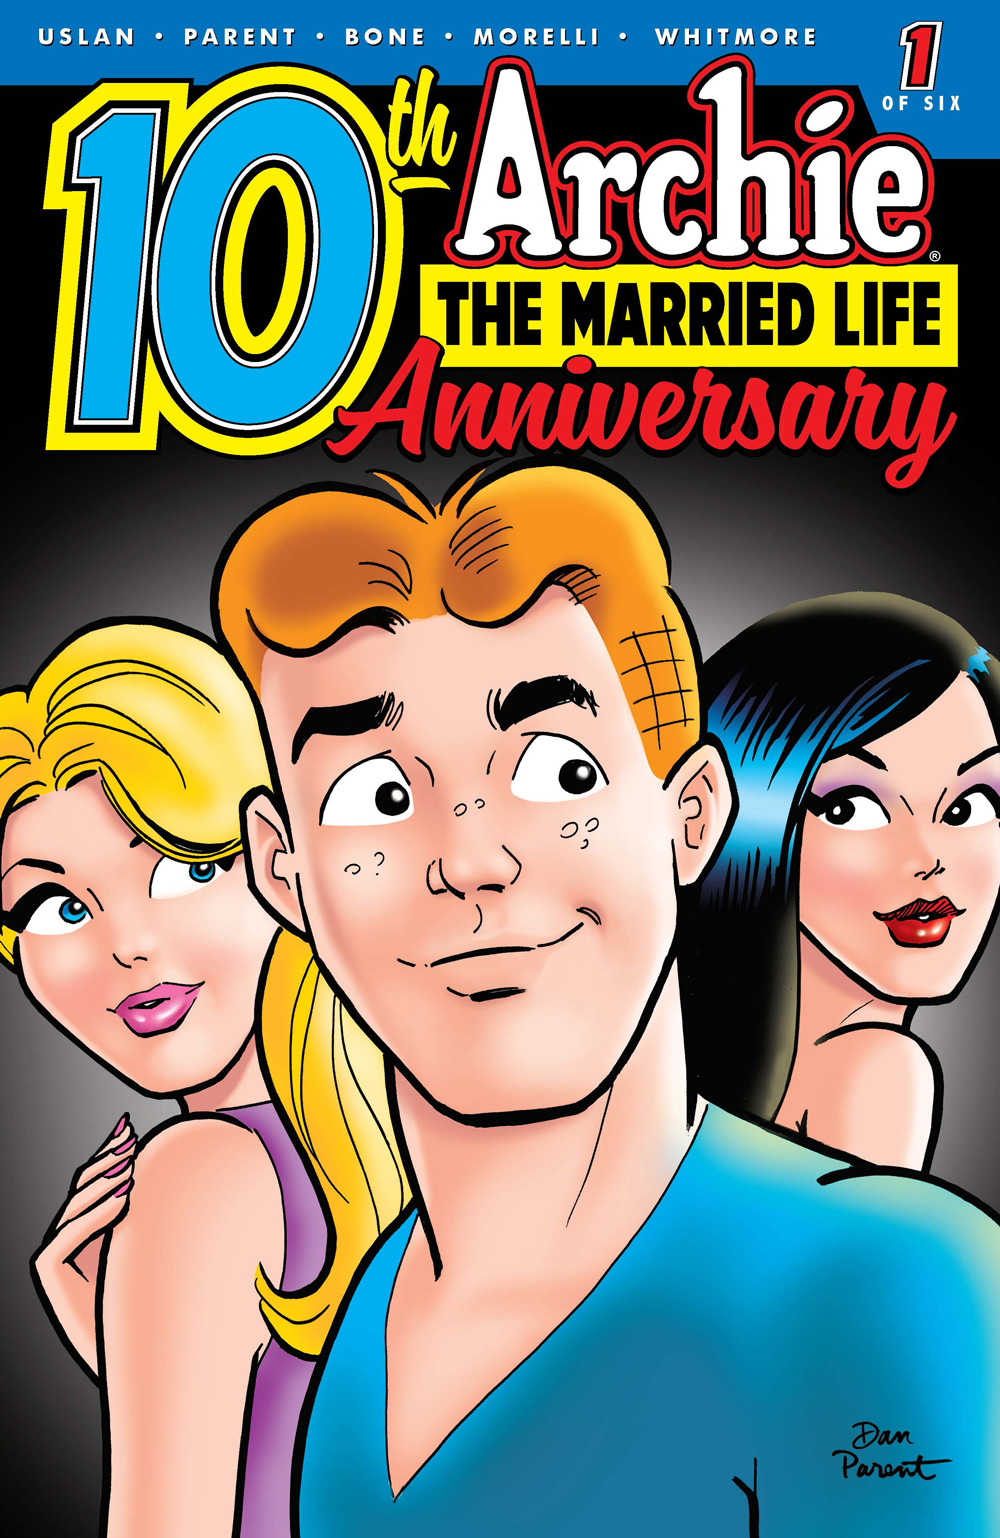 Archie: The Married Life 10th Anniversary #1 - Archie Comics